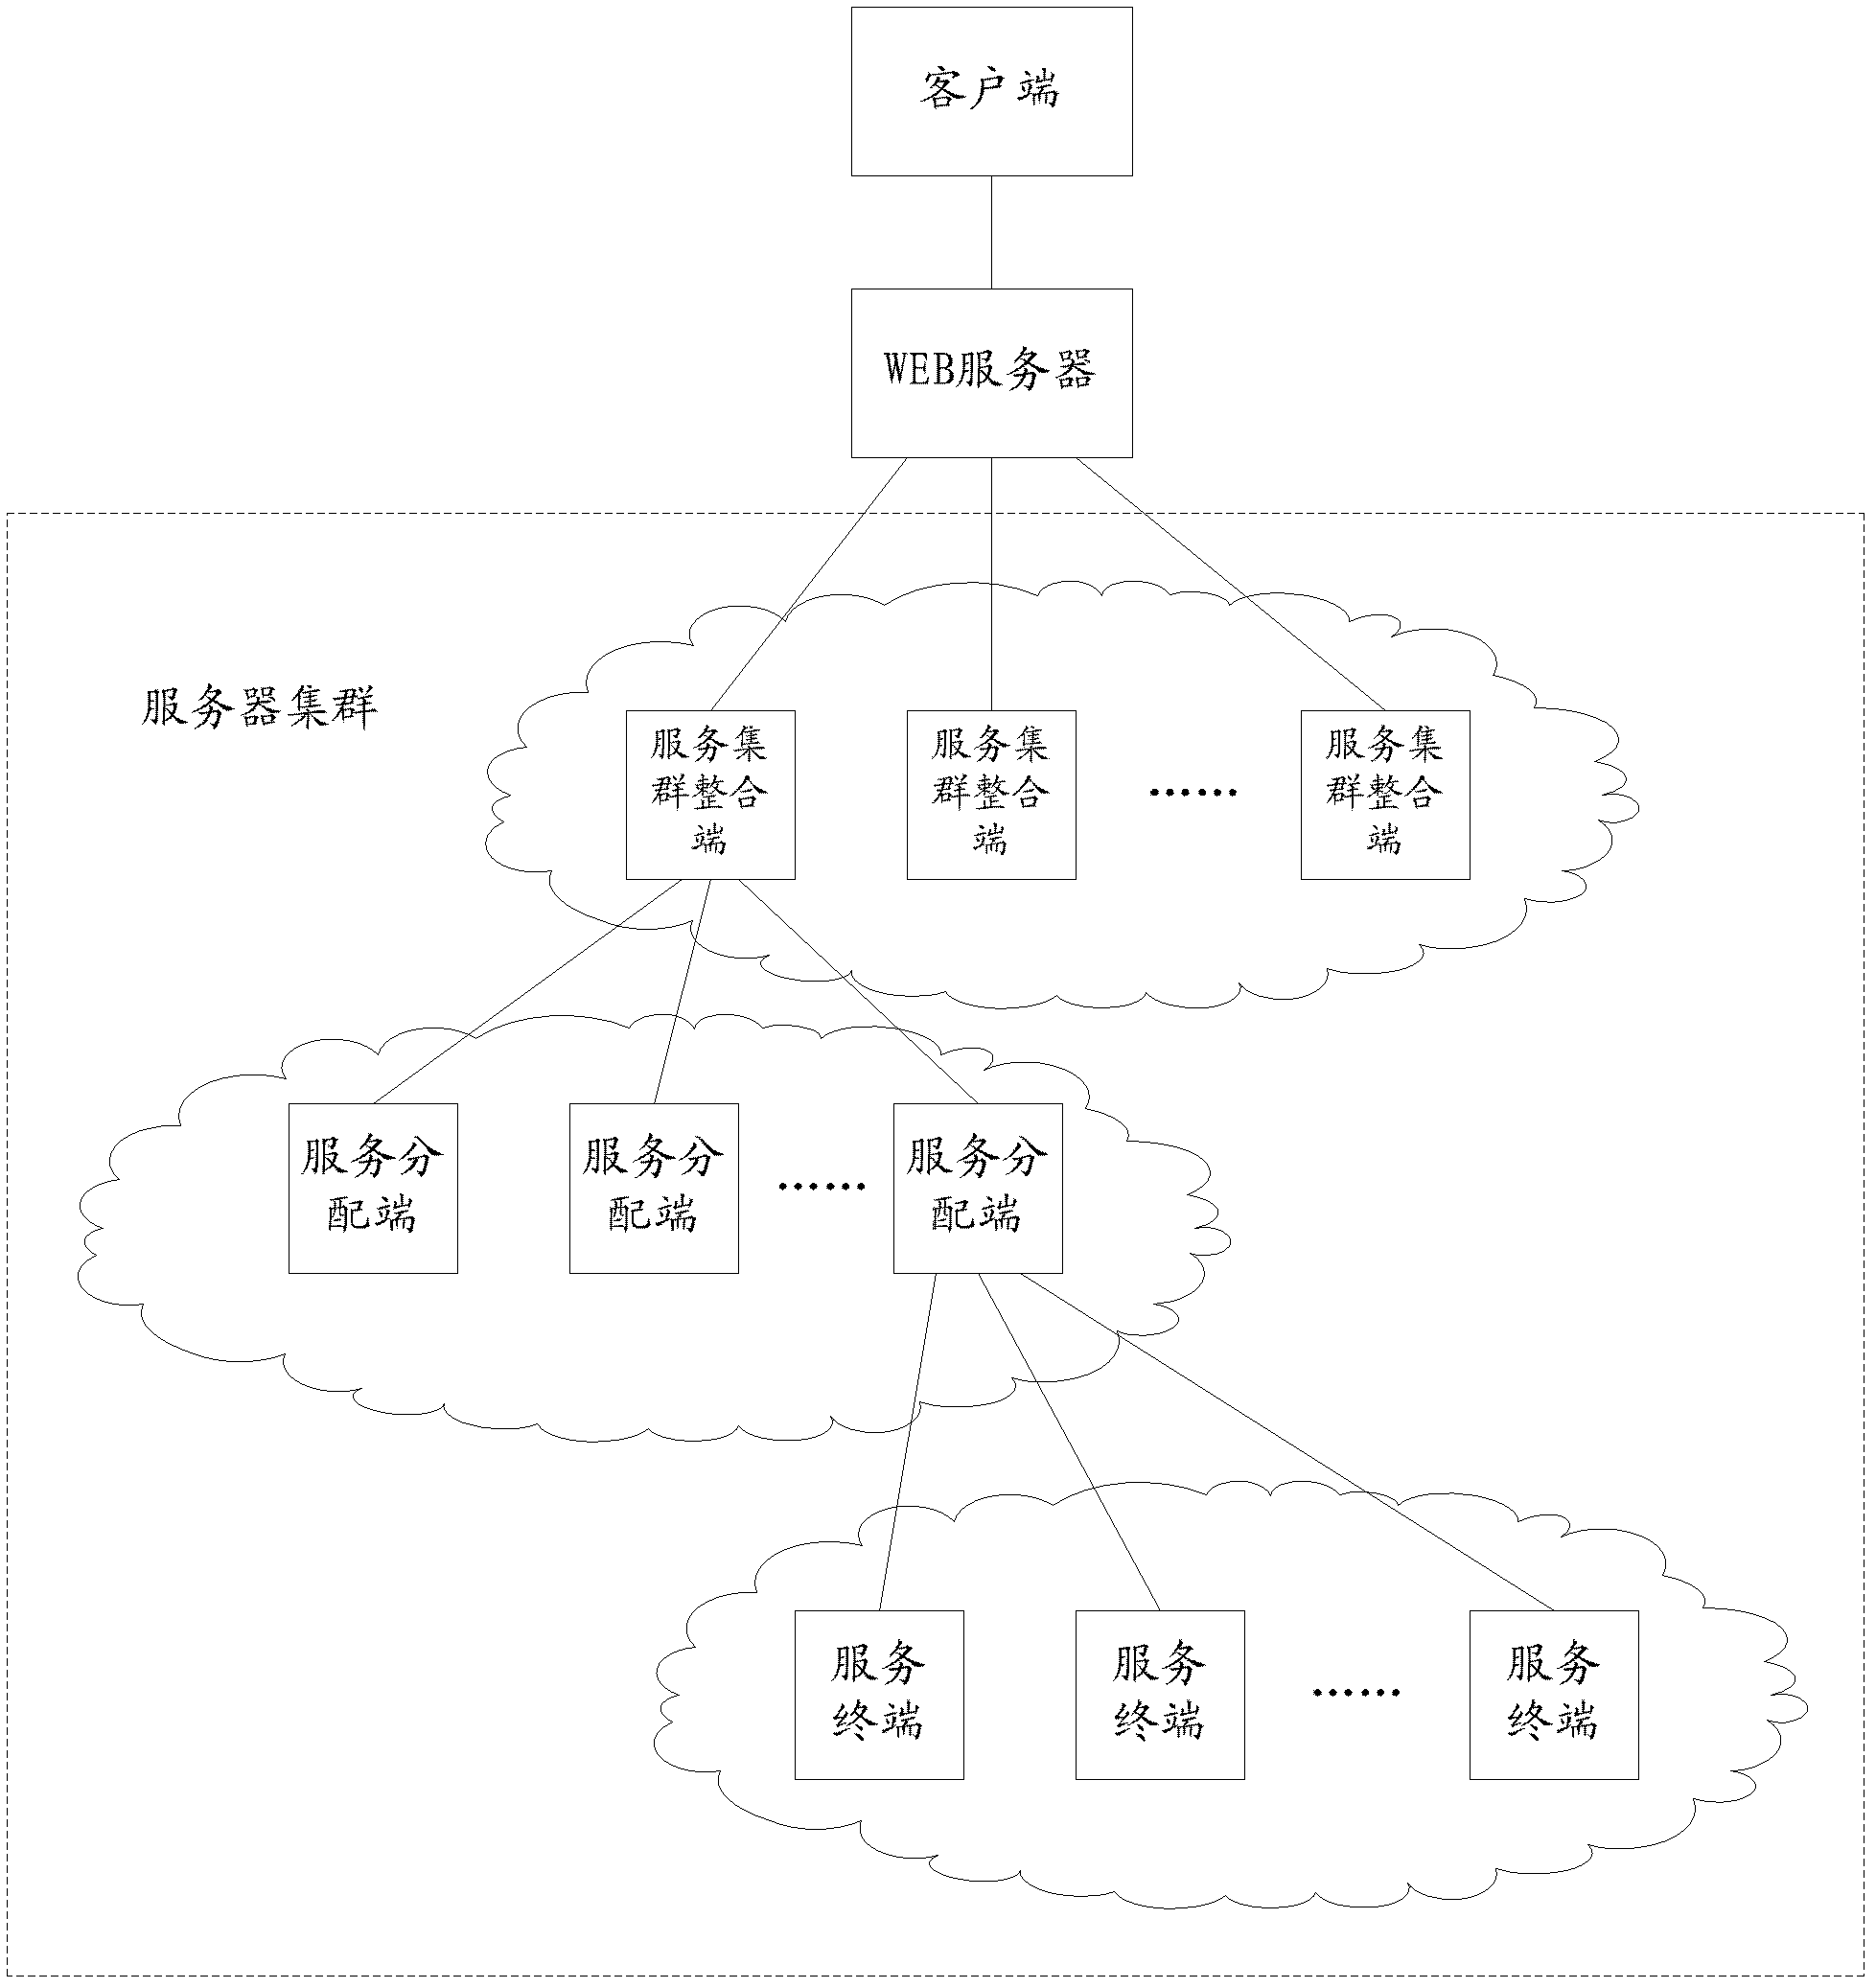 File processing method and system based on cloud storage, and server cluster system